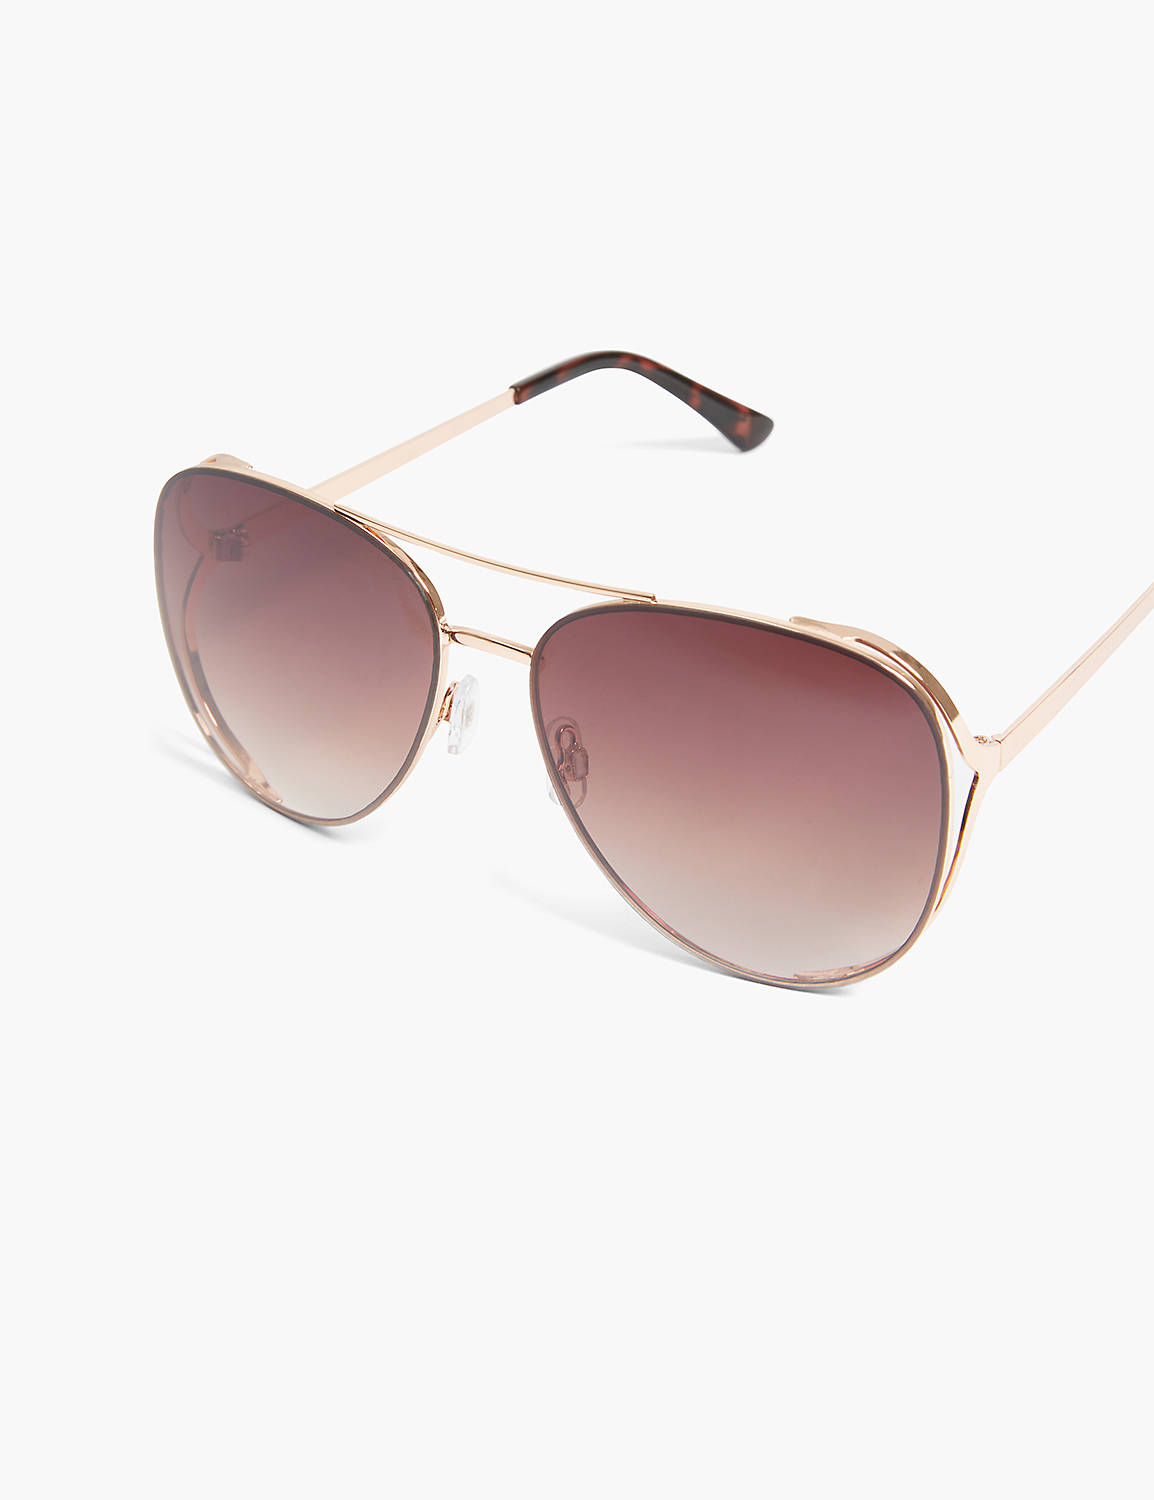 Gold Traditional Aviator Sunglasses Product Image 1